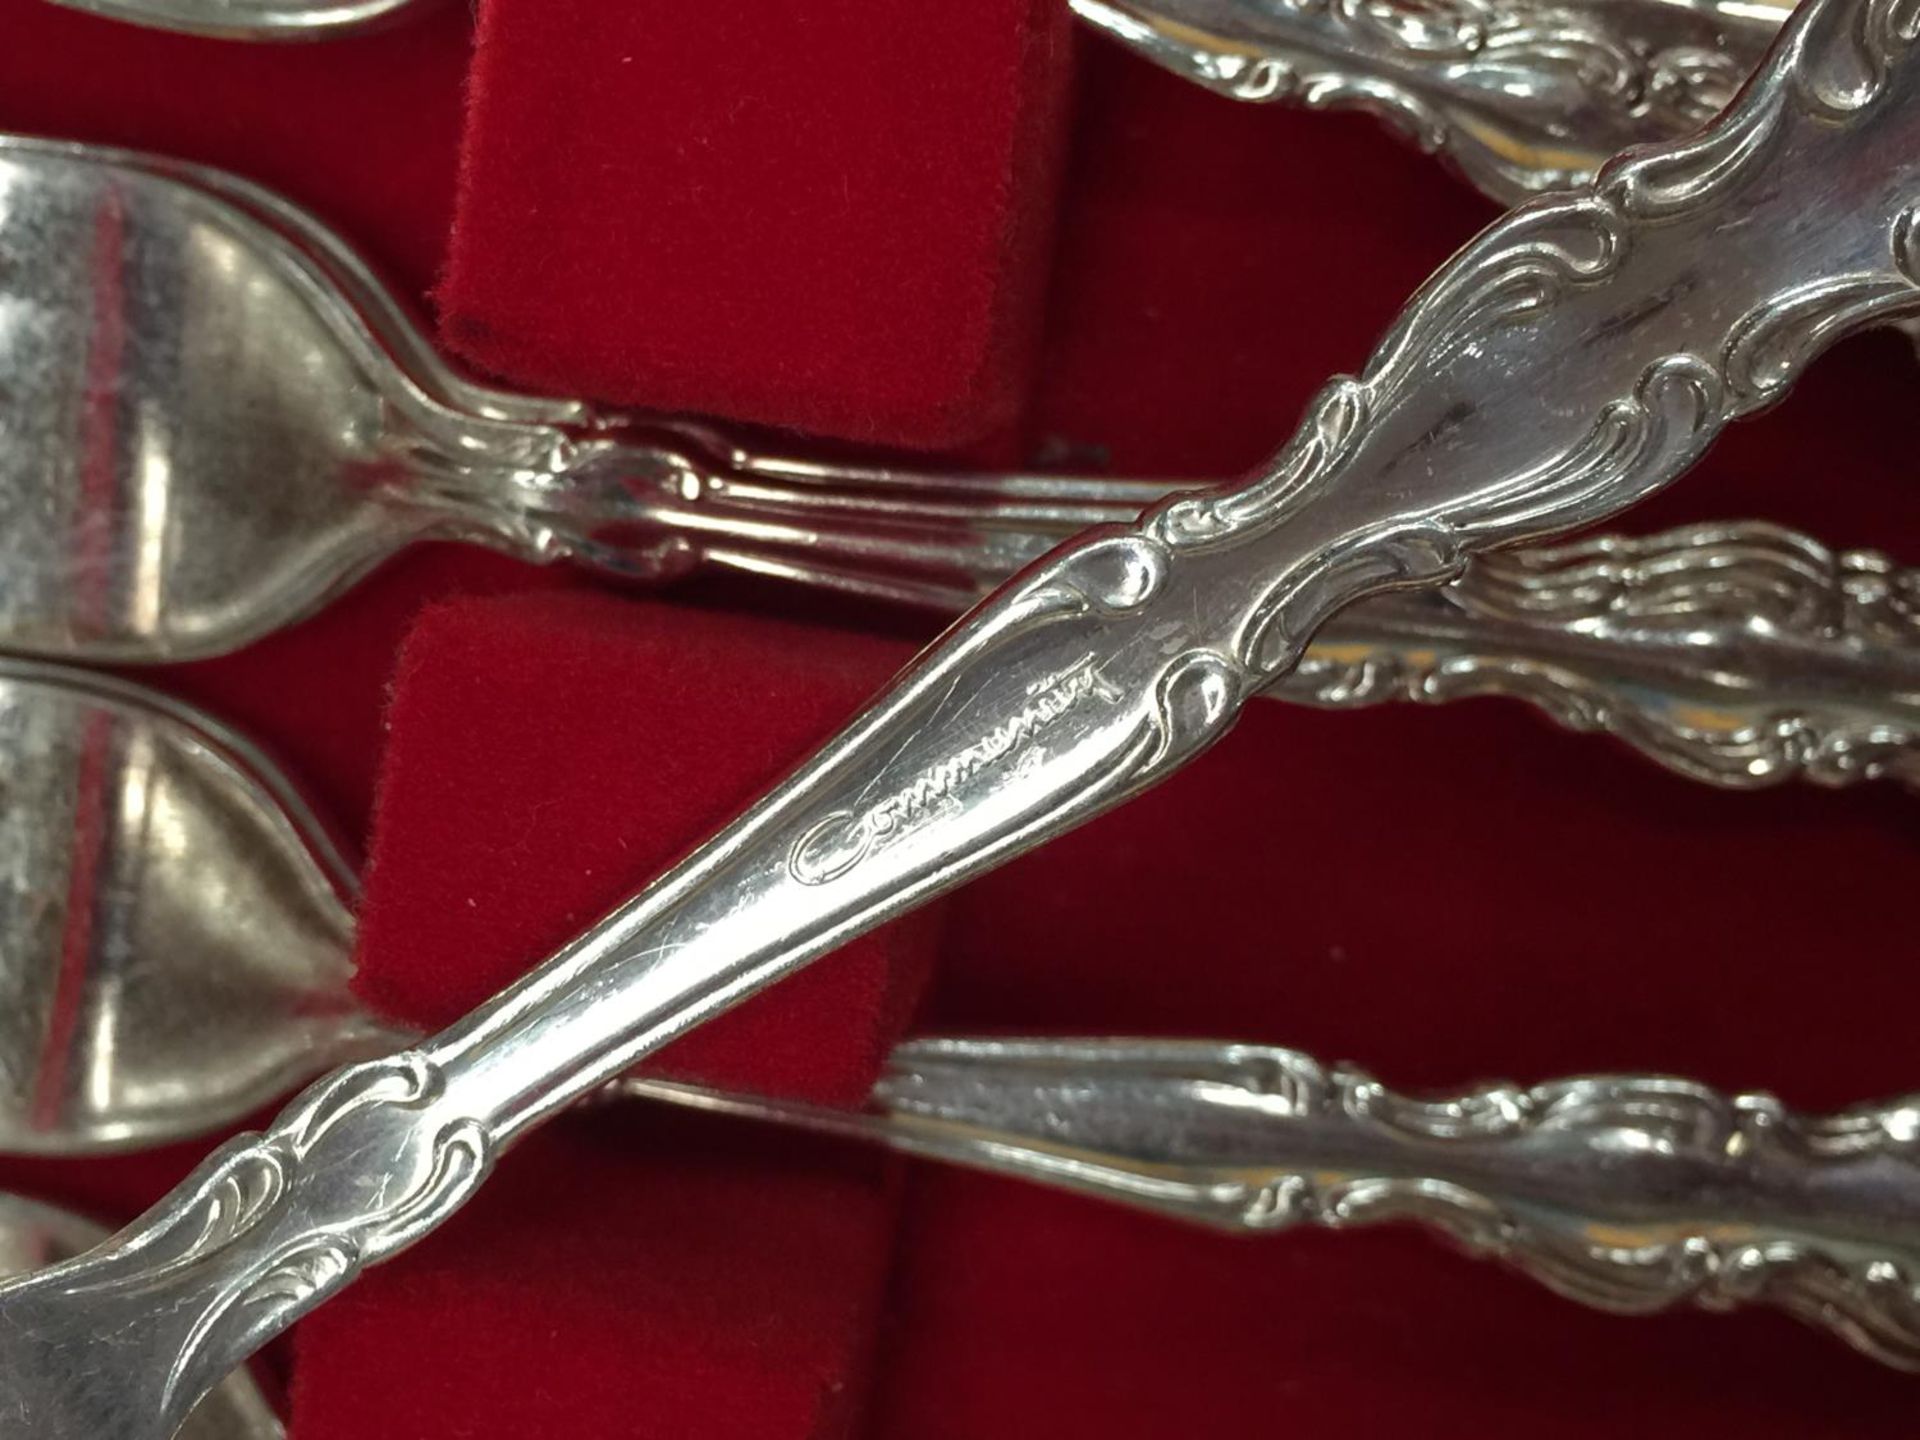 A 48 PIECE COMMUNITY FLATWARE SET IN DISPLAY CASE - Image 10 of 12